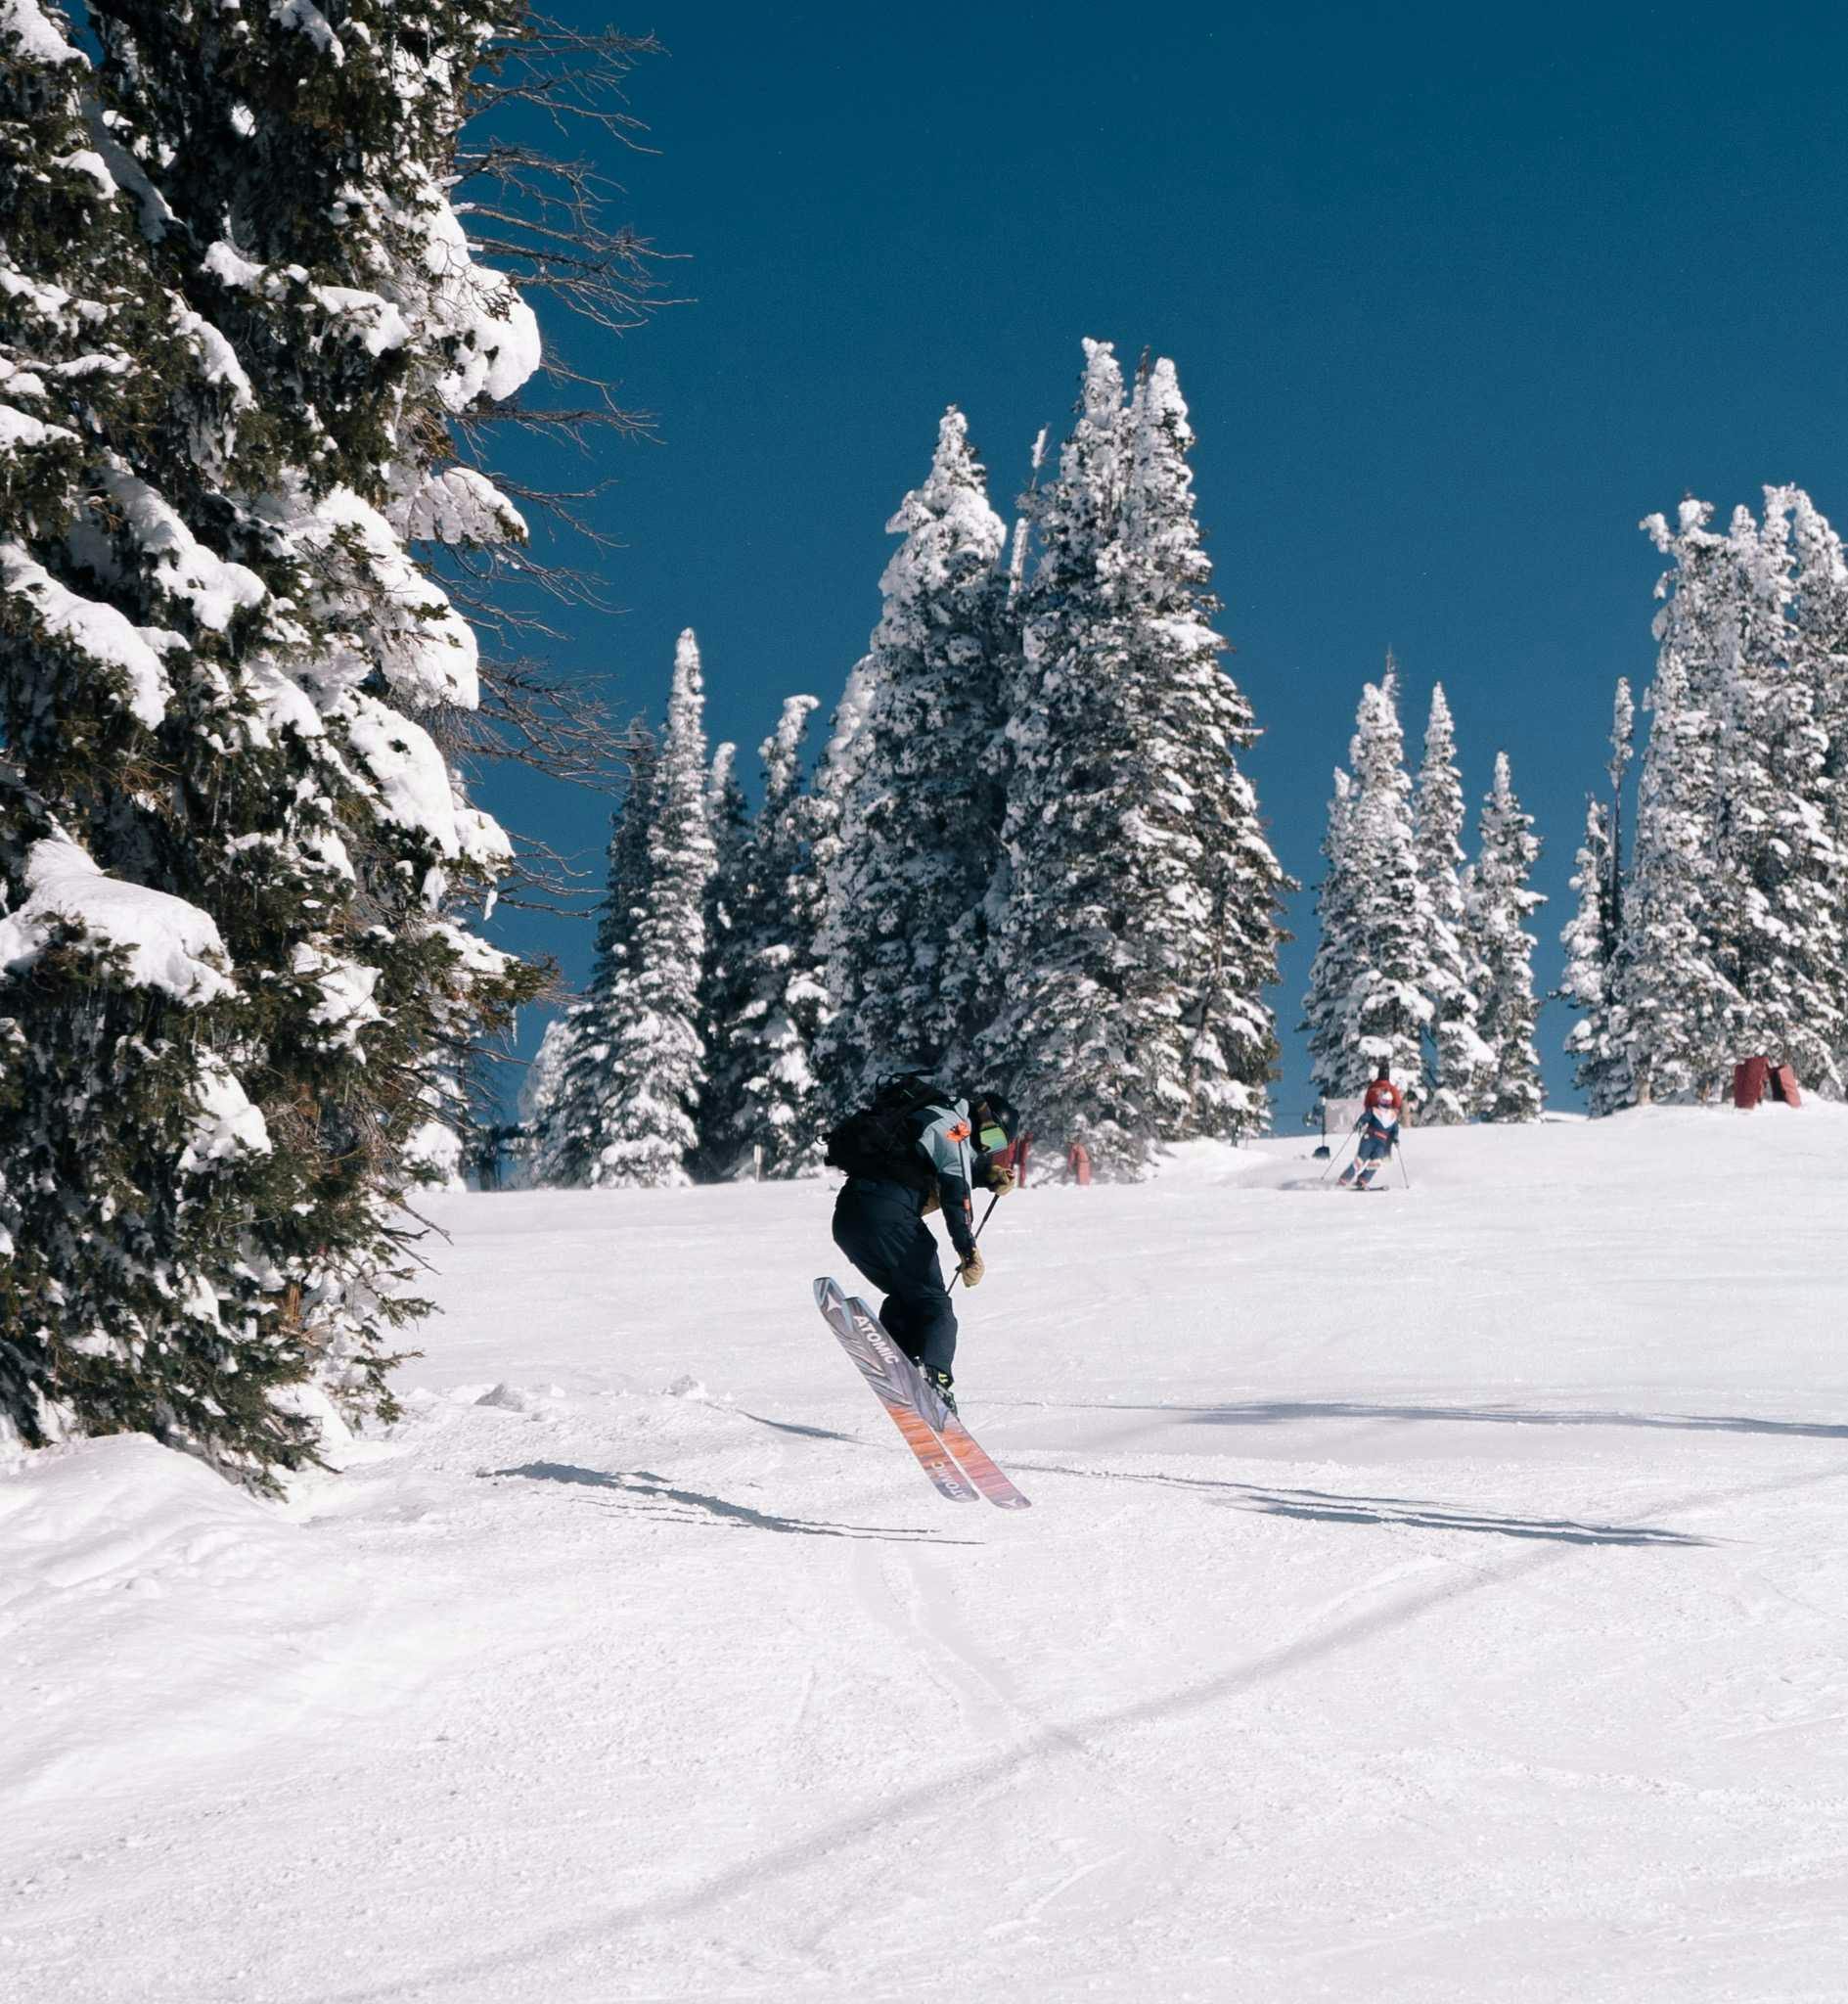 Someone lands a jump in skis. Snow-dusted trees line the background and the sky is a deep, clear blue. 